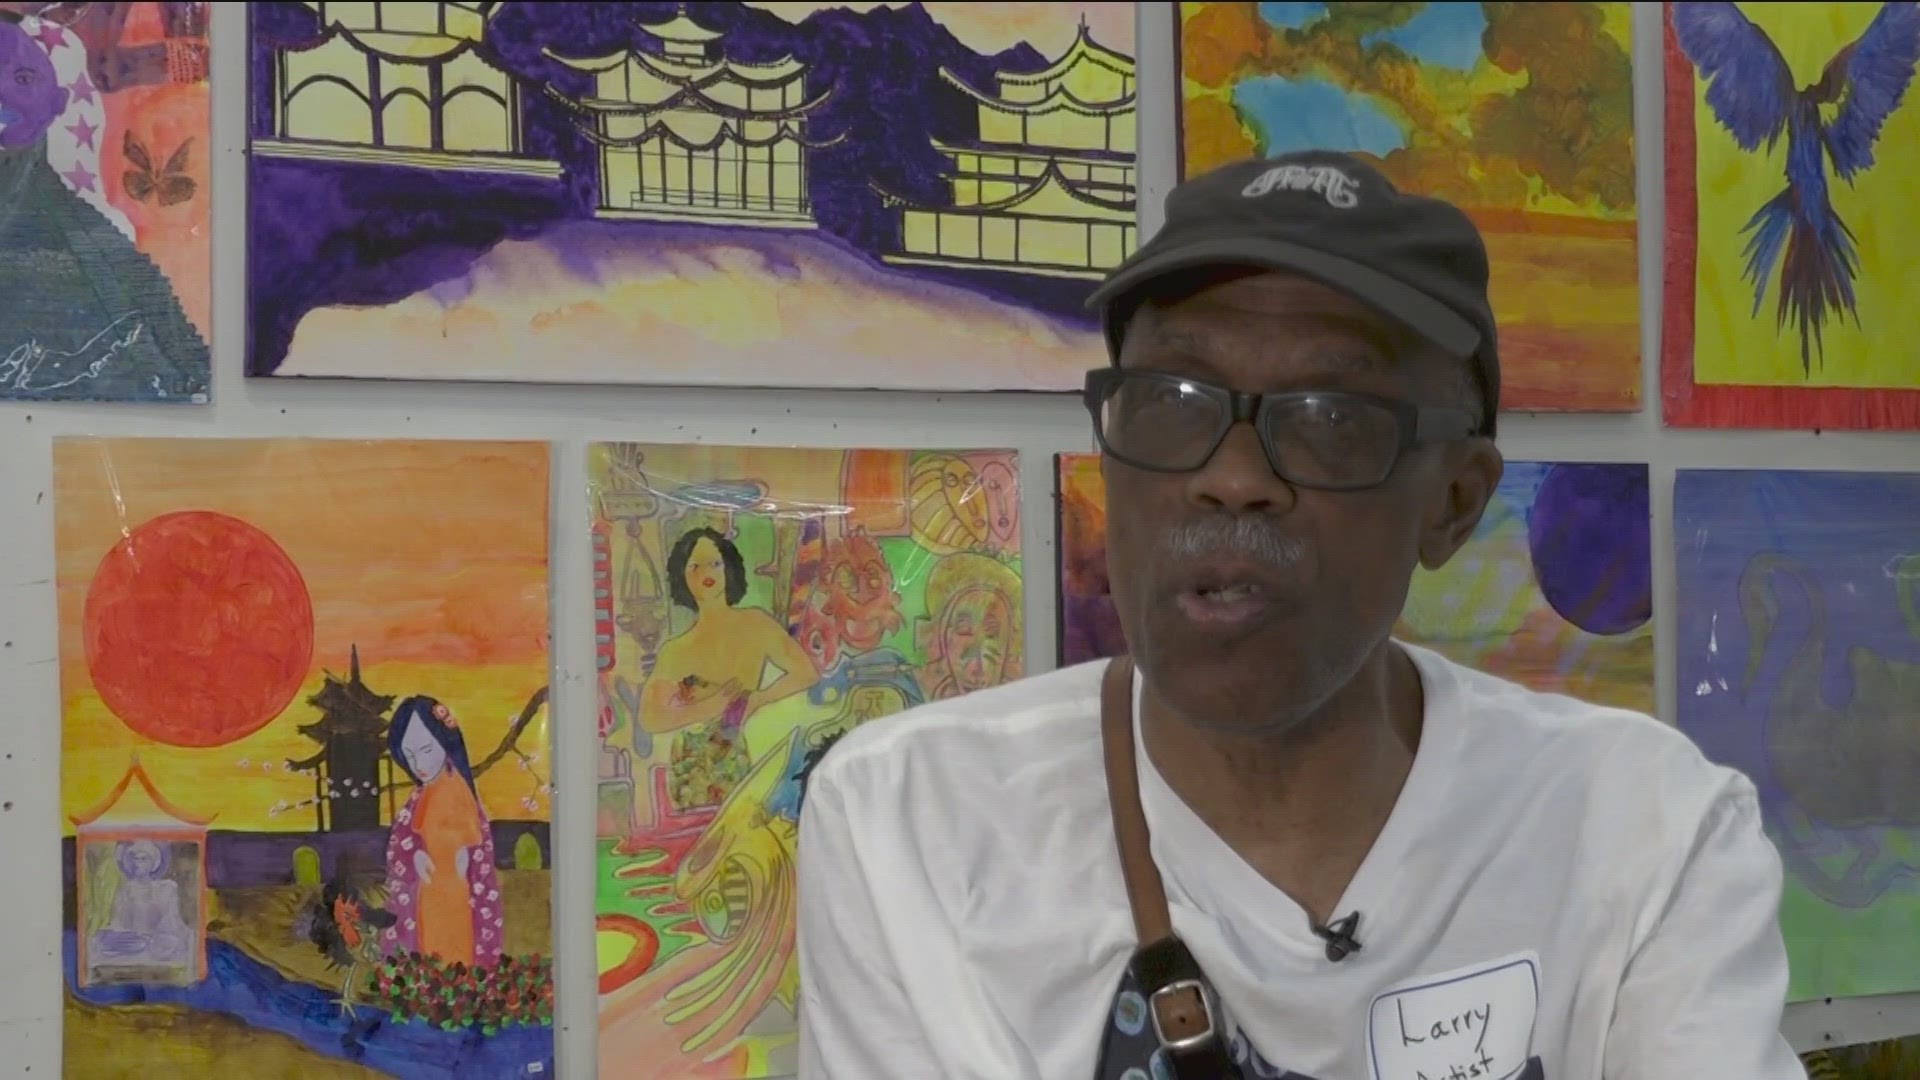 This weekend marked the 31st year of the Art from the Streets show in Austin. It gives homeless and at risk people the chance to sell their artwork.